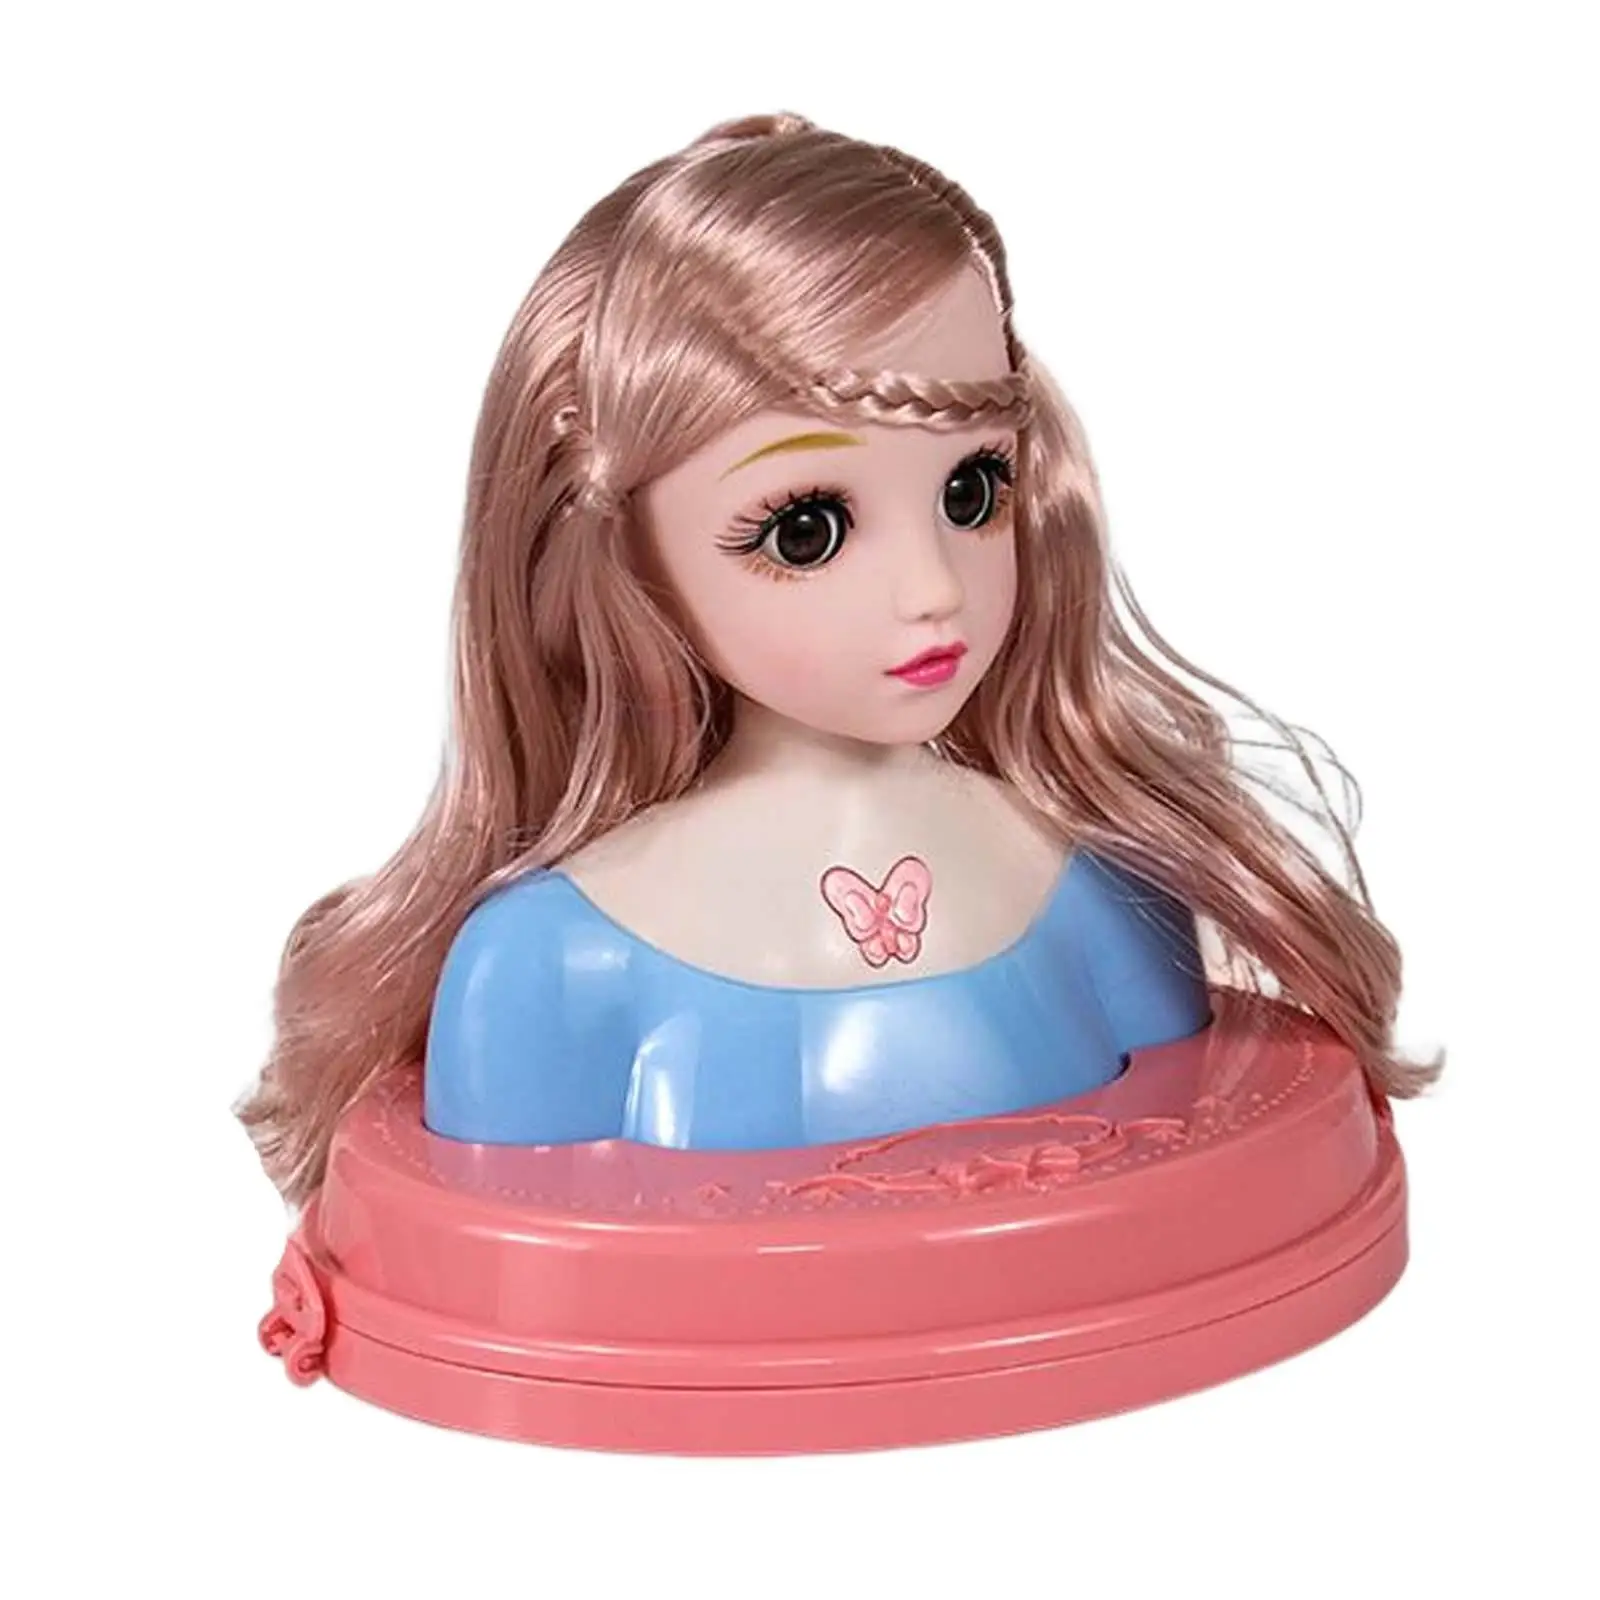 Fashion Doll Styling Head Toy Playset Princess Doll Movable Eyelids Makeup Dolls for Teens Adults Children Kids Birthday Gifts